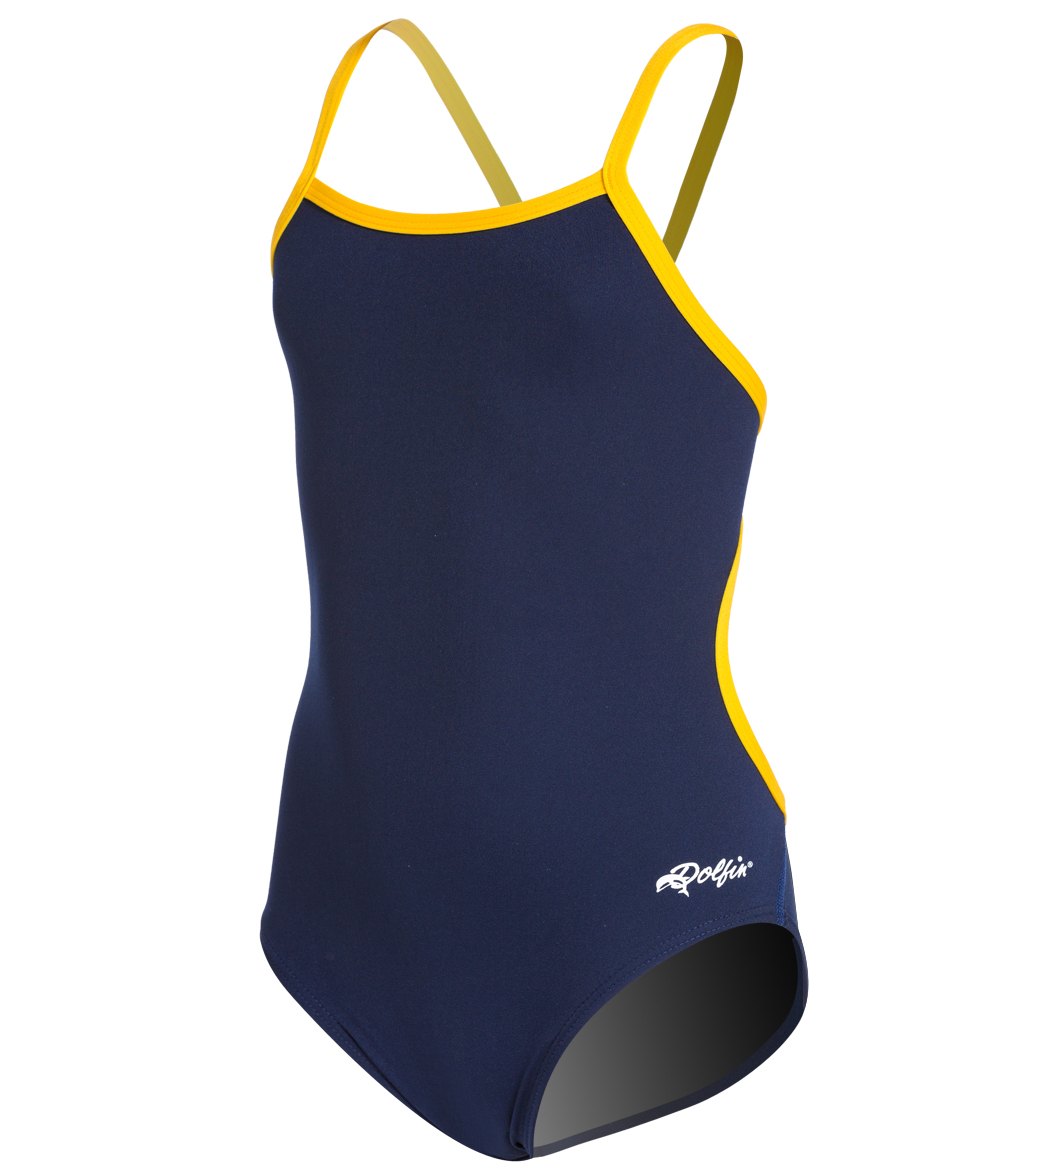 Dolfin Girls' All Poly Varsity Solid String Back One Piece Swimsuit - Navy/Gold 22 Polyester - Swimoutlet.com